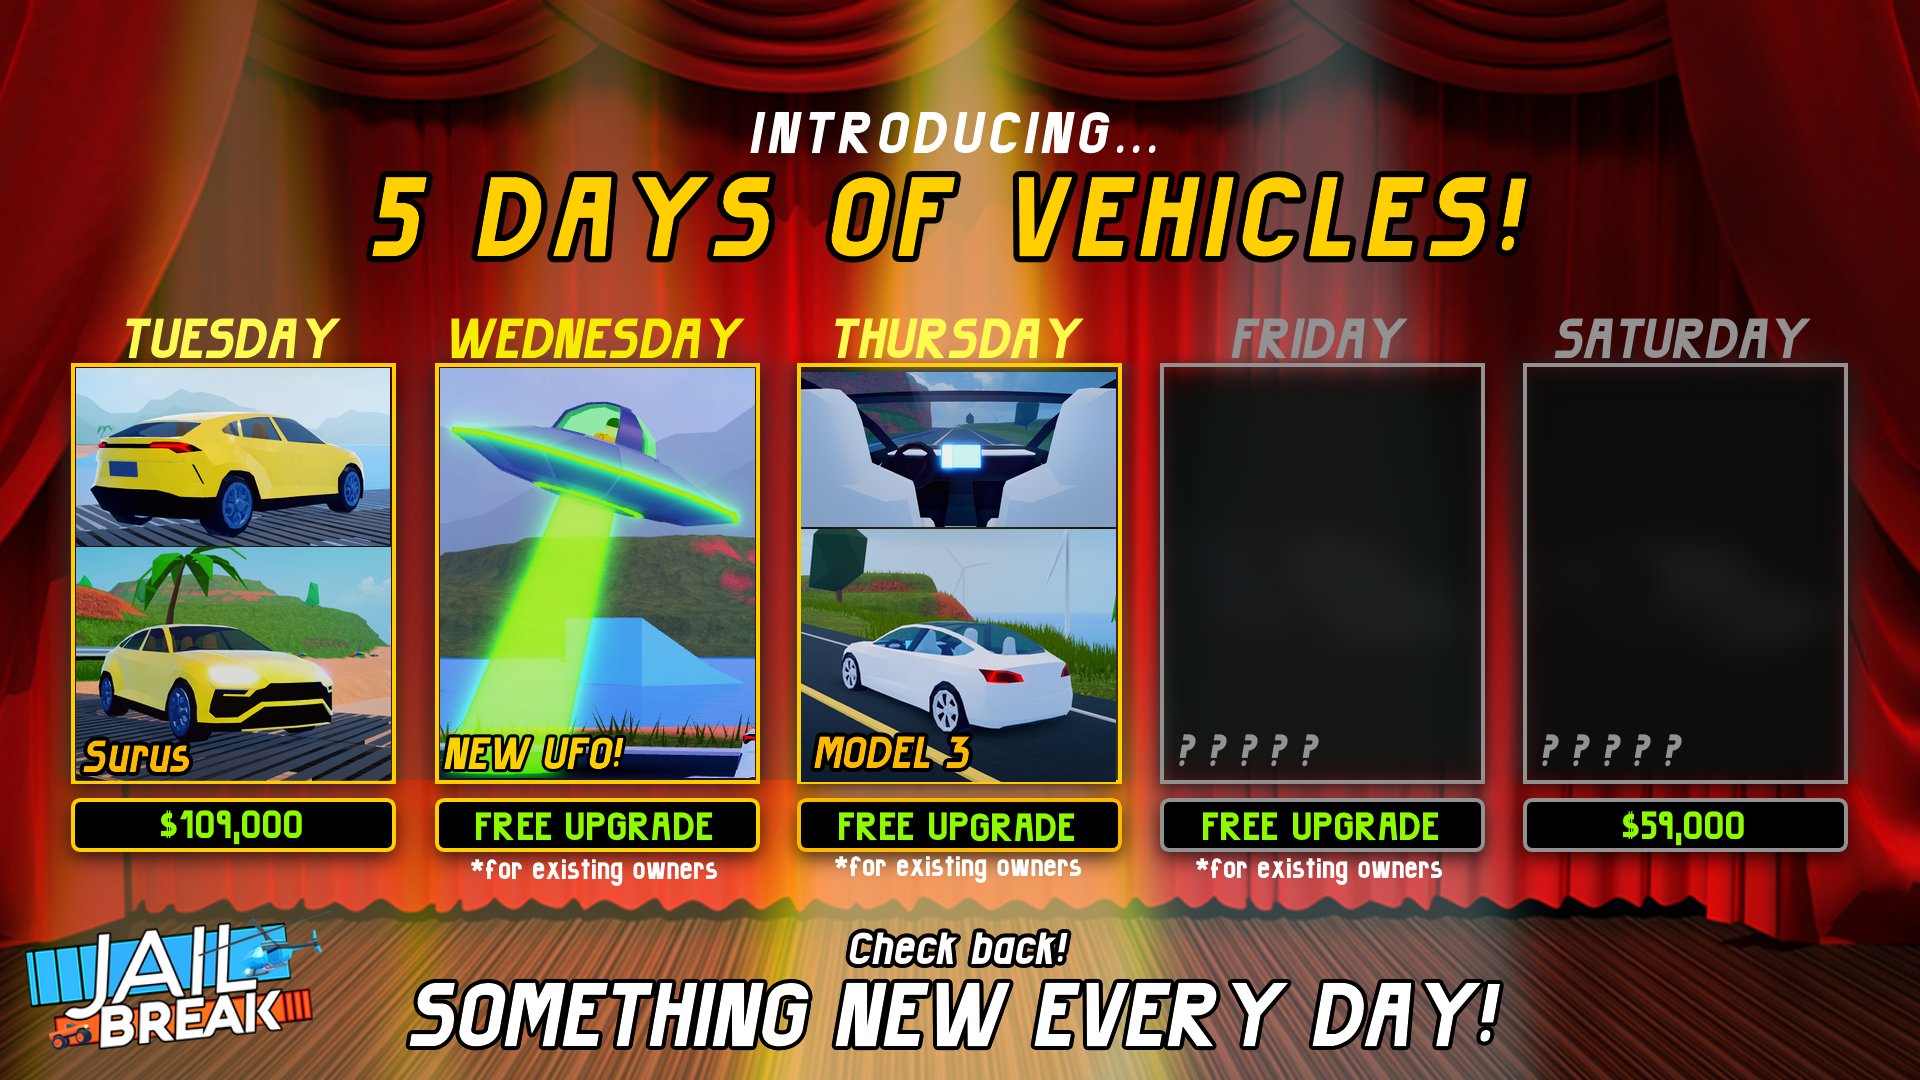 Badimo On Twitter 5 Days 5 Vehicles The 3rd New Vehicle Is Also A Refresh And It Is The Model 3 Featuring A Futuristic Spaceship Interior With A 15 - the new fastest car in jailbreak best car roblox jailbreak new update